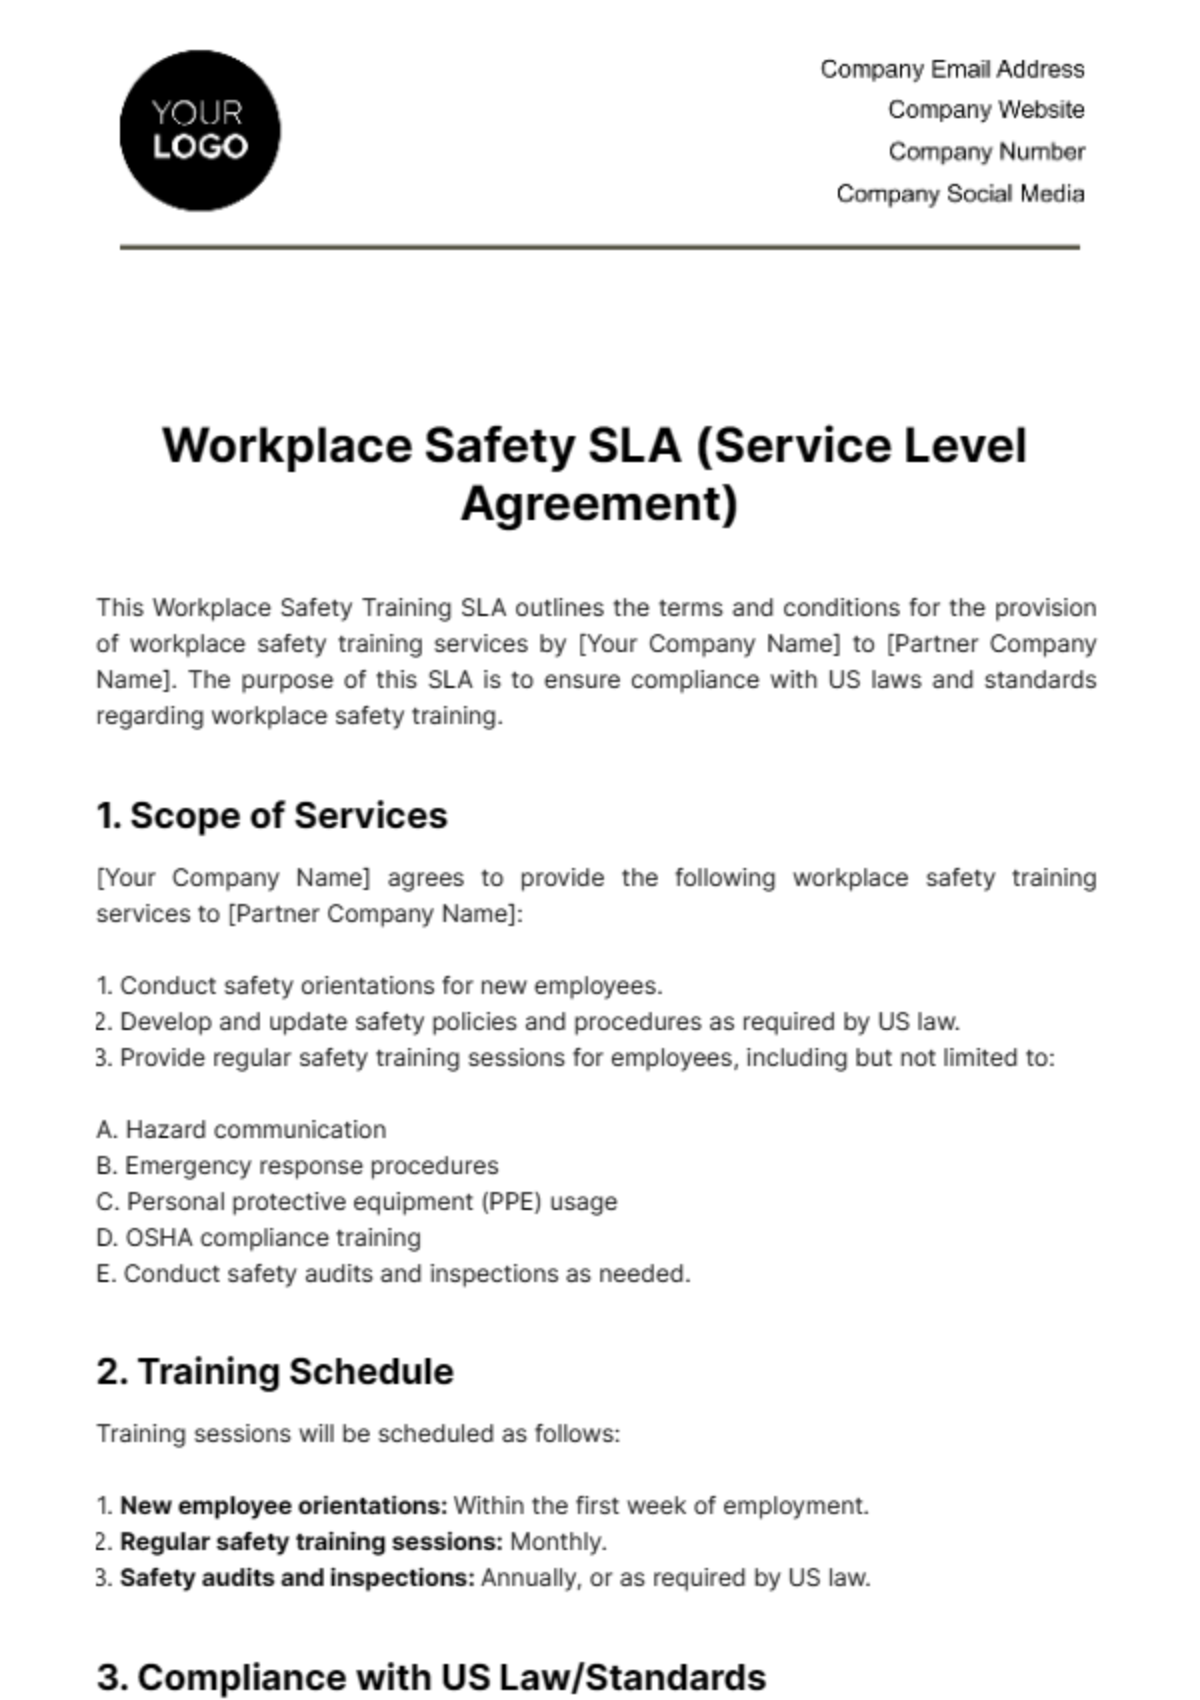 Workplace Safety SLA (Service Level Agreement) Template